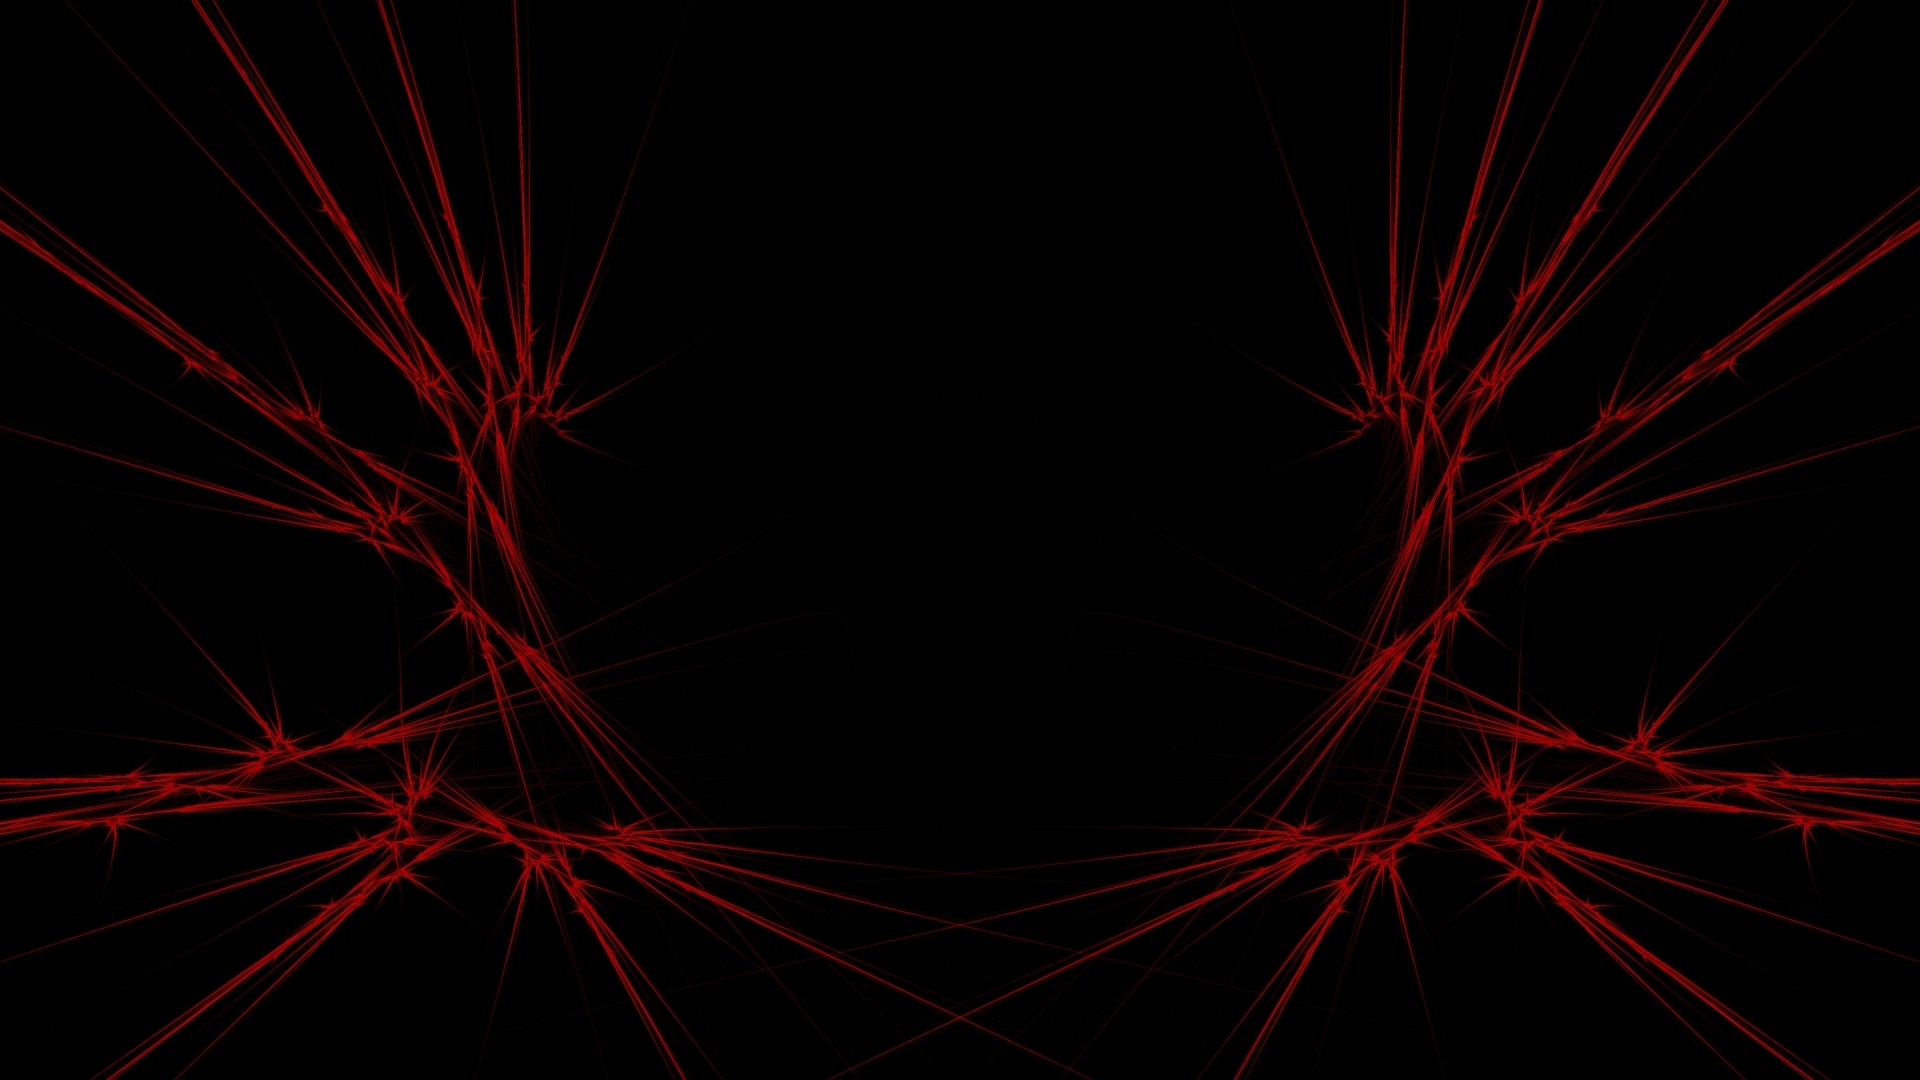 … Background Full HD 1080p. Wallpaper red, black, abstract